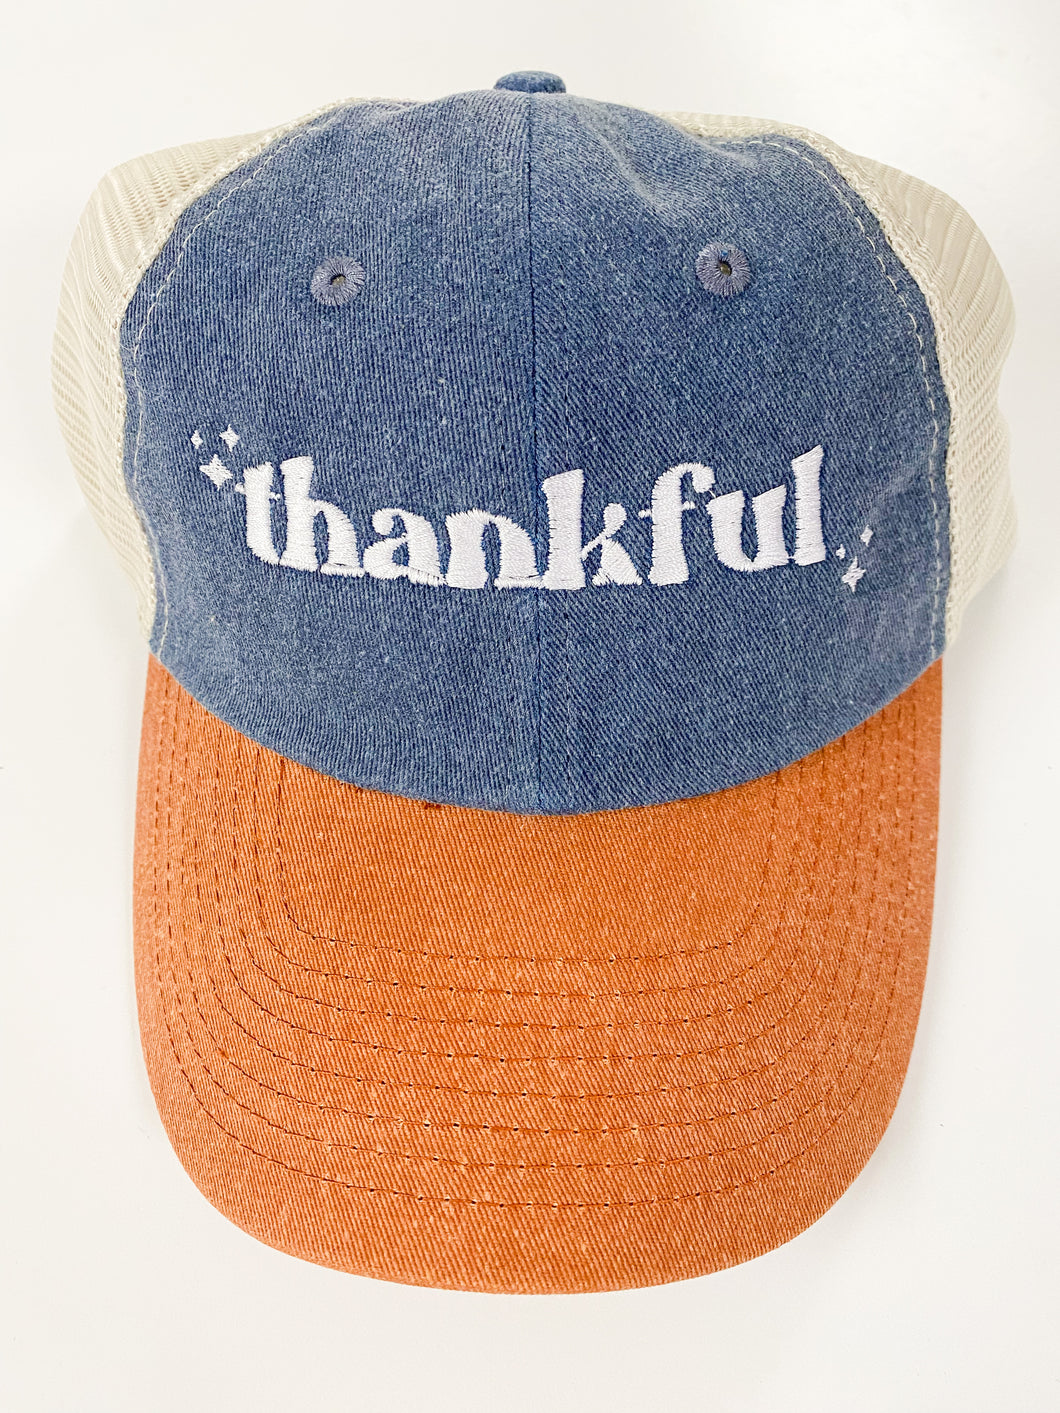 Thankful Relaxed Fit Trucker Hat